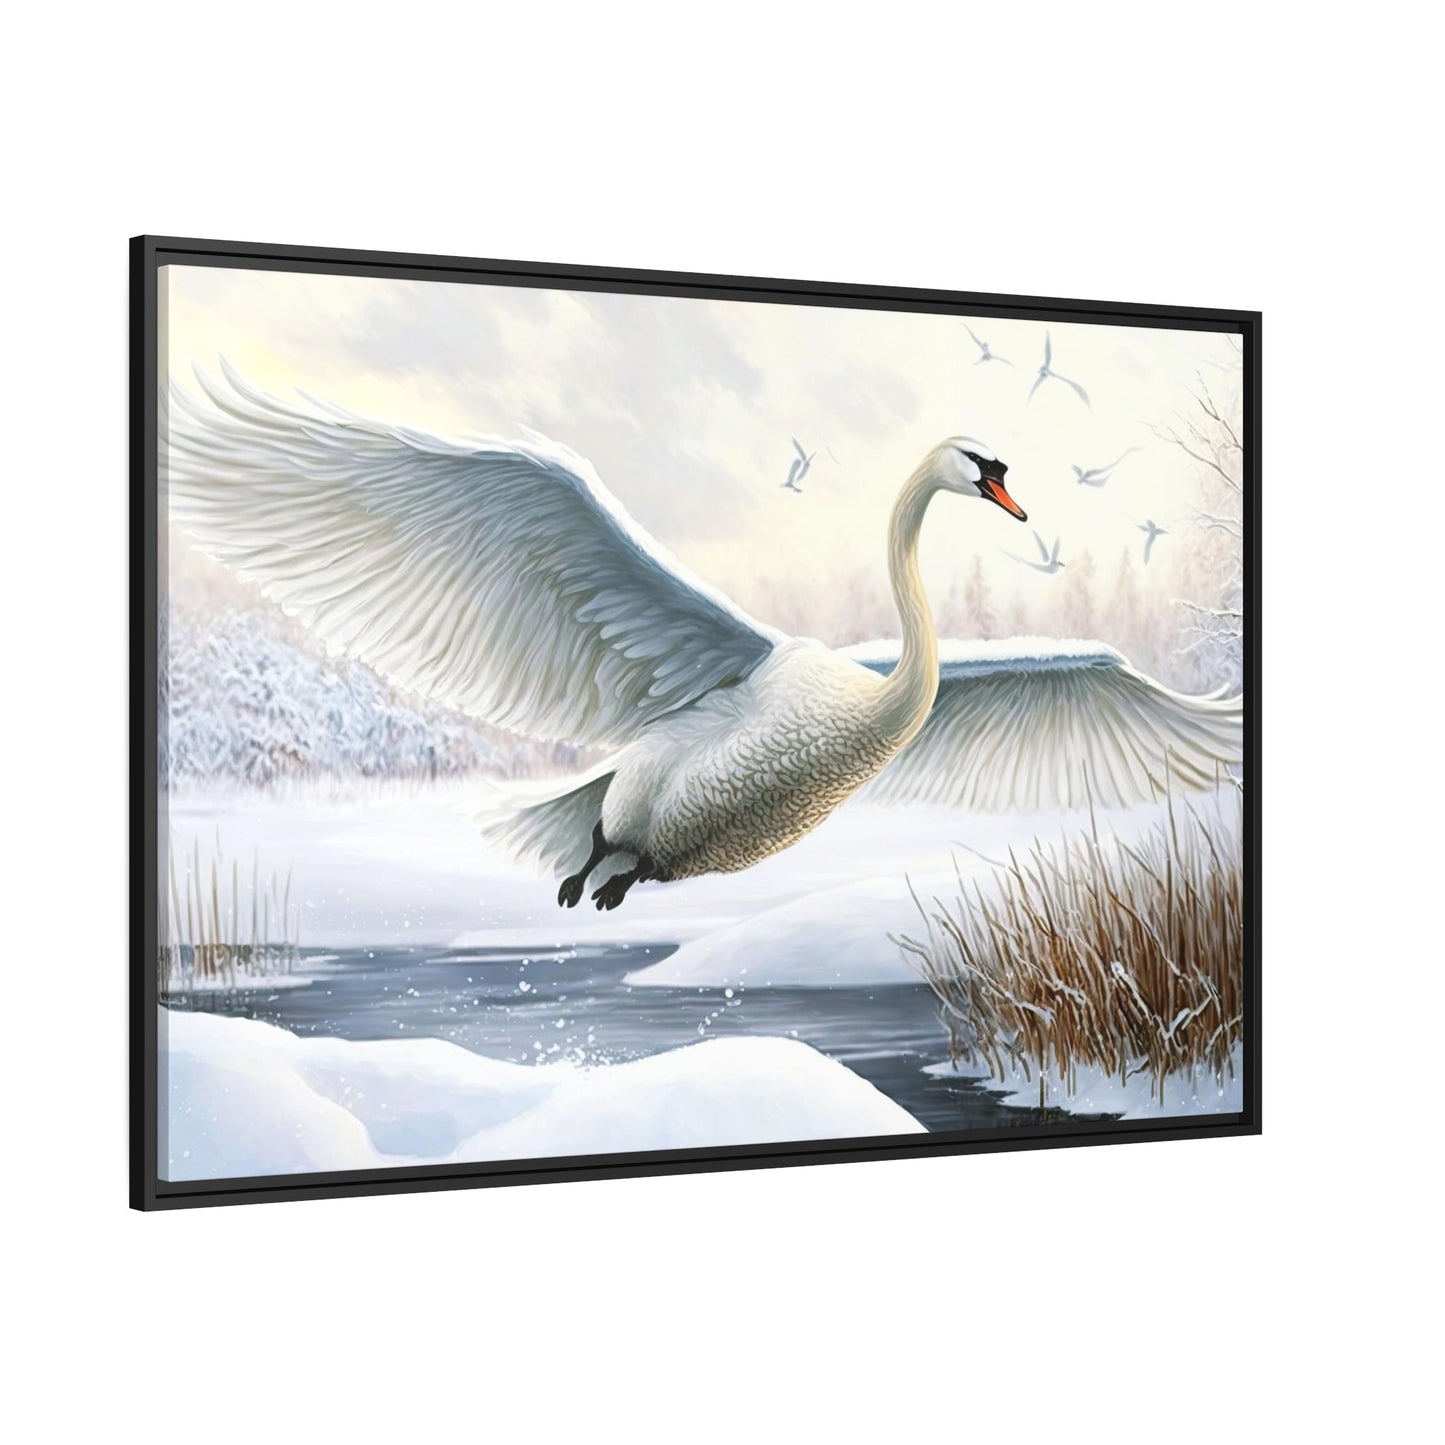 The Art of Nature: Natural Canvas Print of Swans in Their Natural Habitat